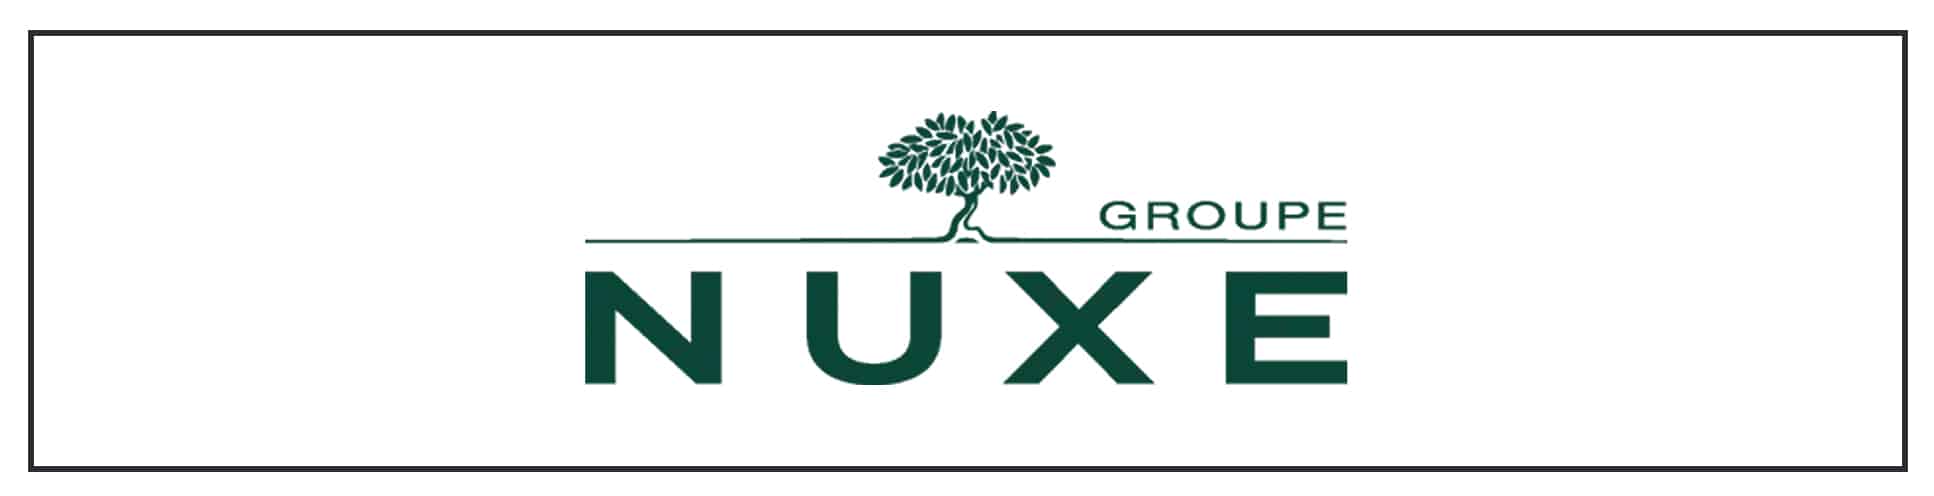 Groupe nuxe logo on a white background.